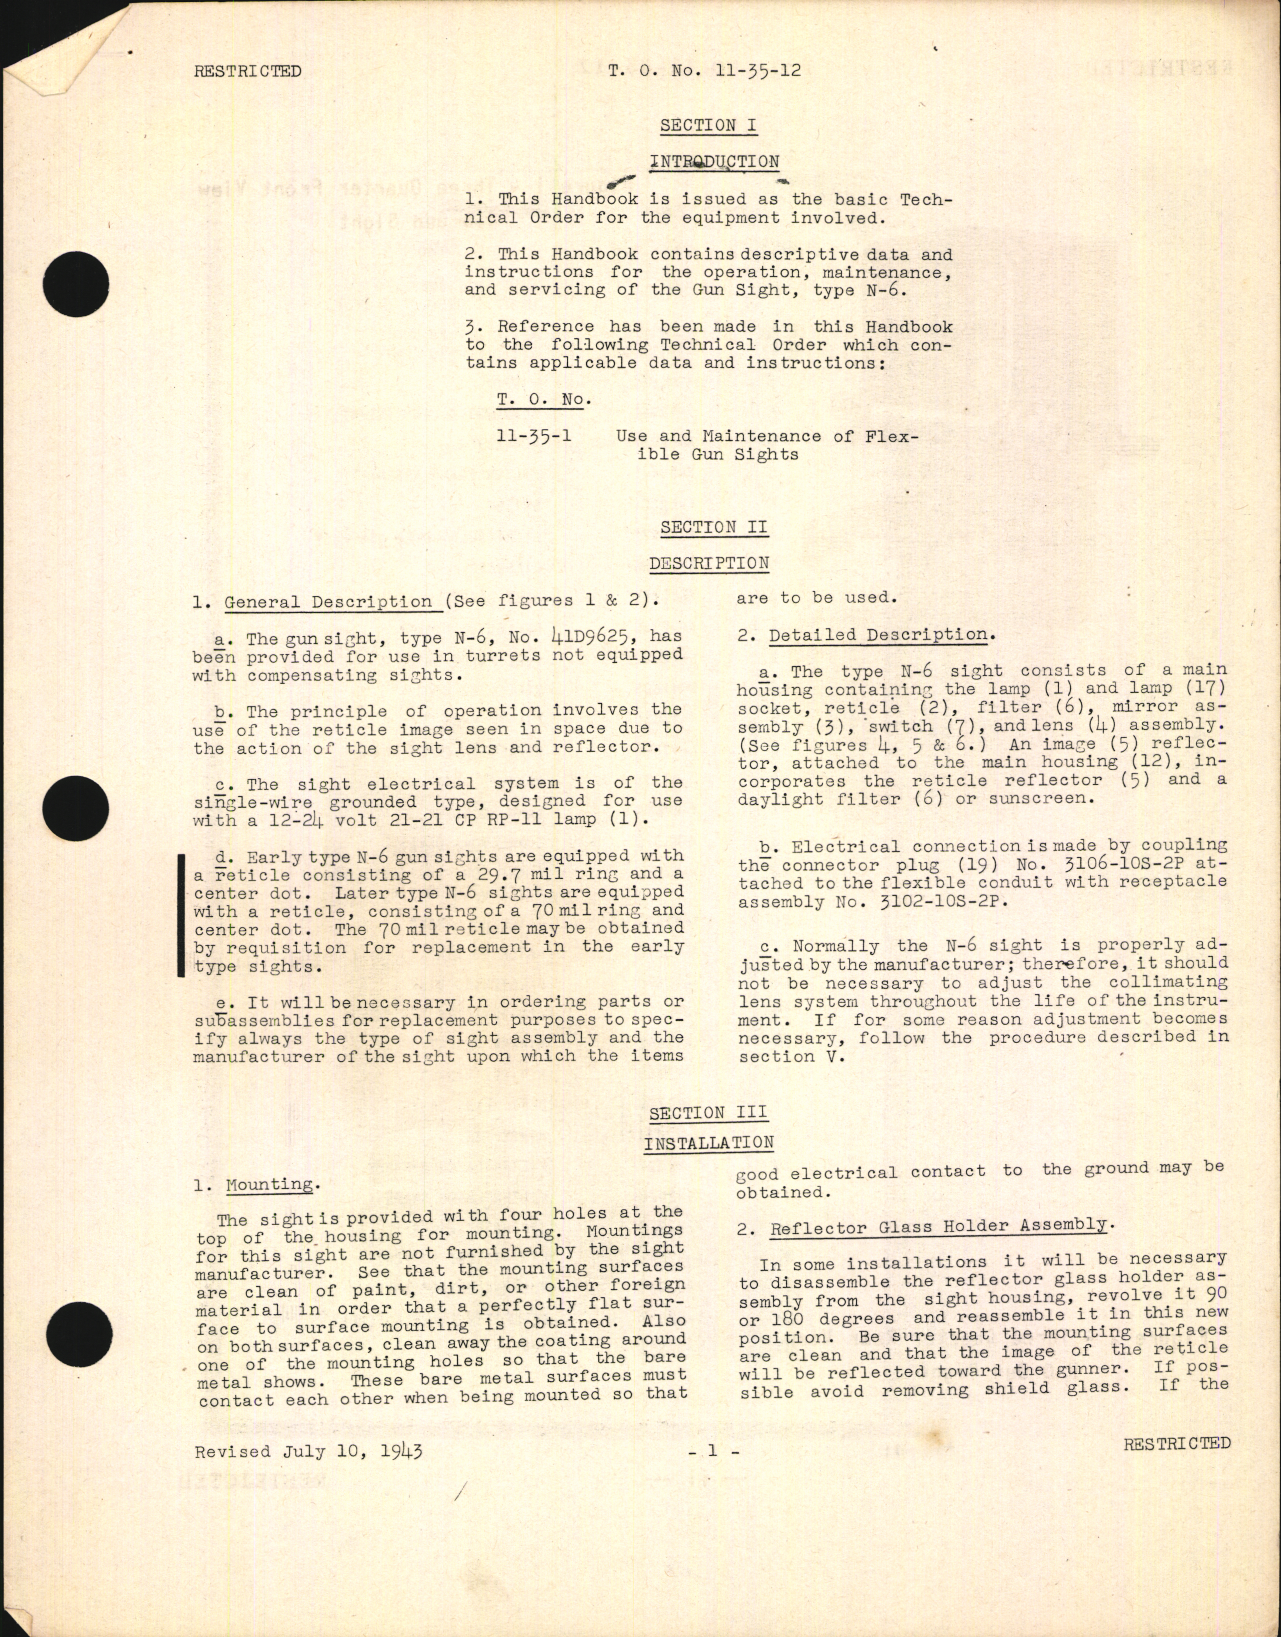 Sample page 7 from AirCorps Library document: Handbook of Instructions with Parts Catalog for Type N-6 Gunsight